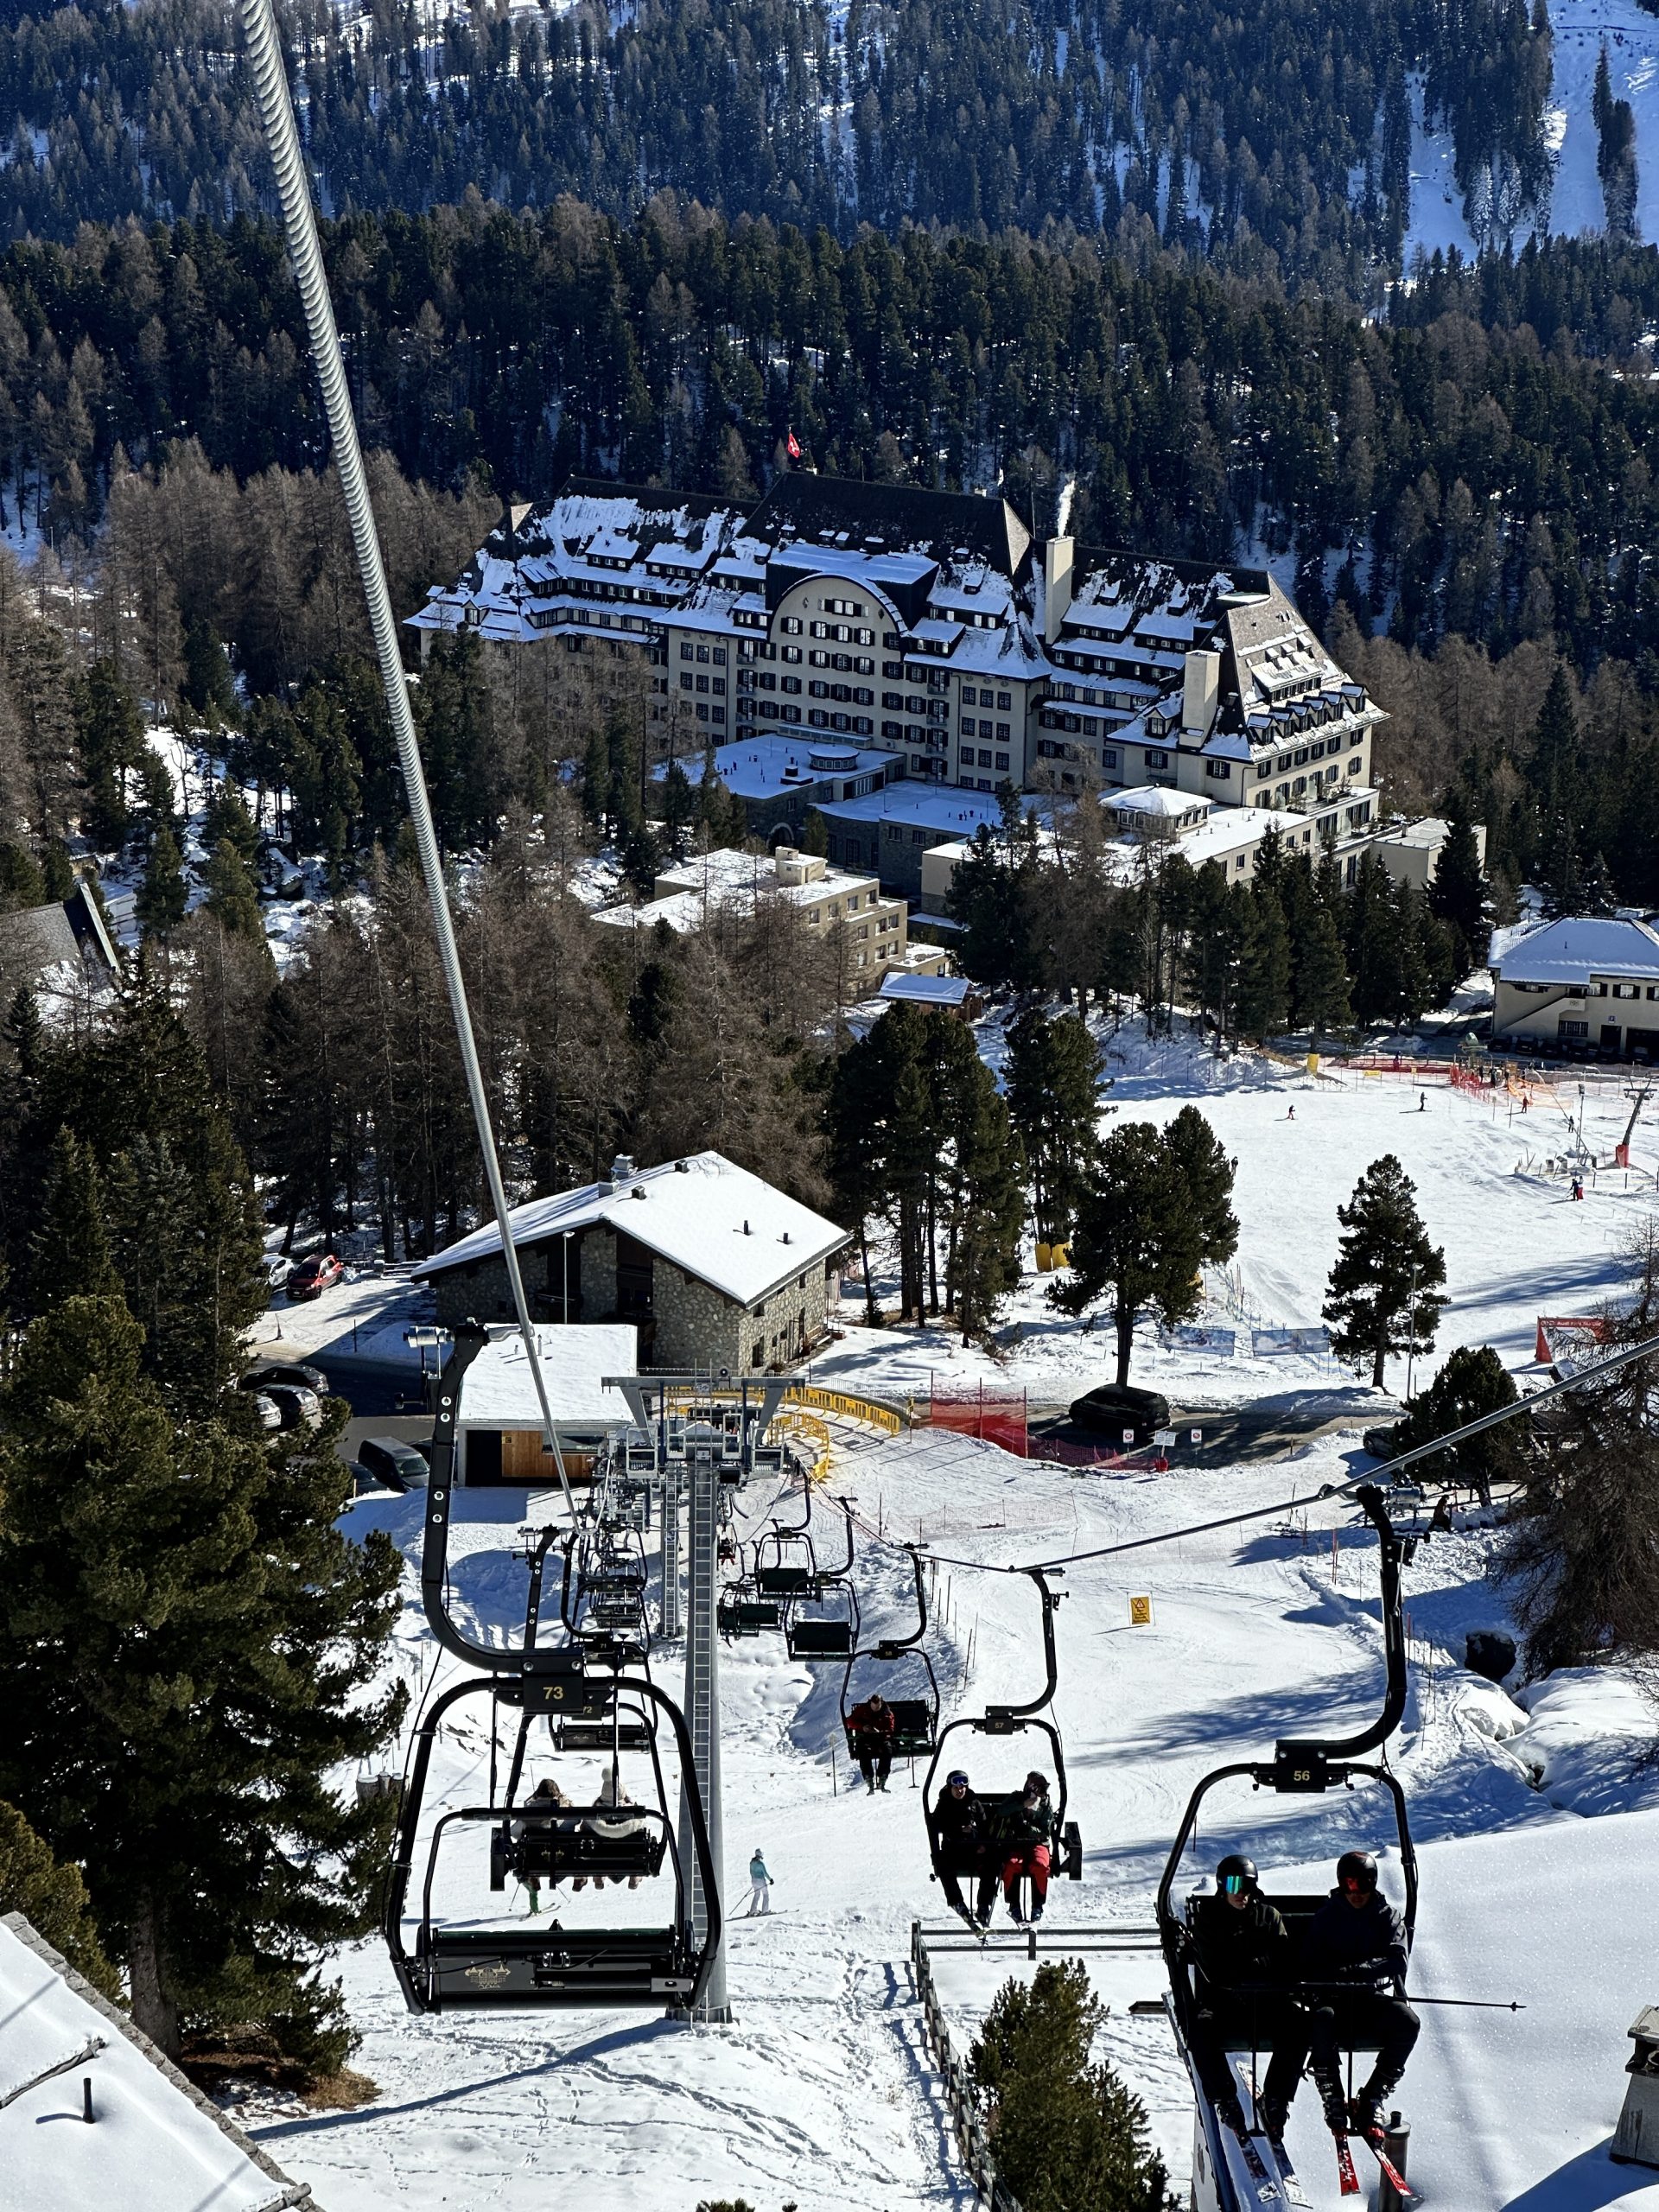 Come with me to the Louis Vuitton ski club in the mountains